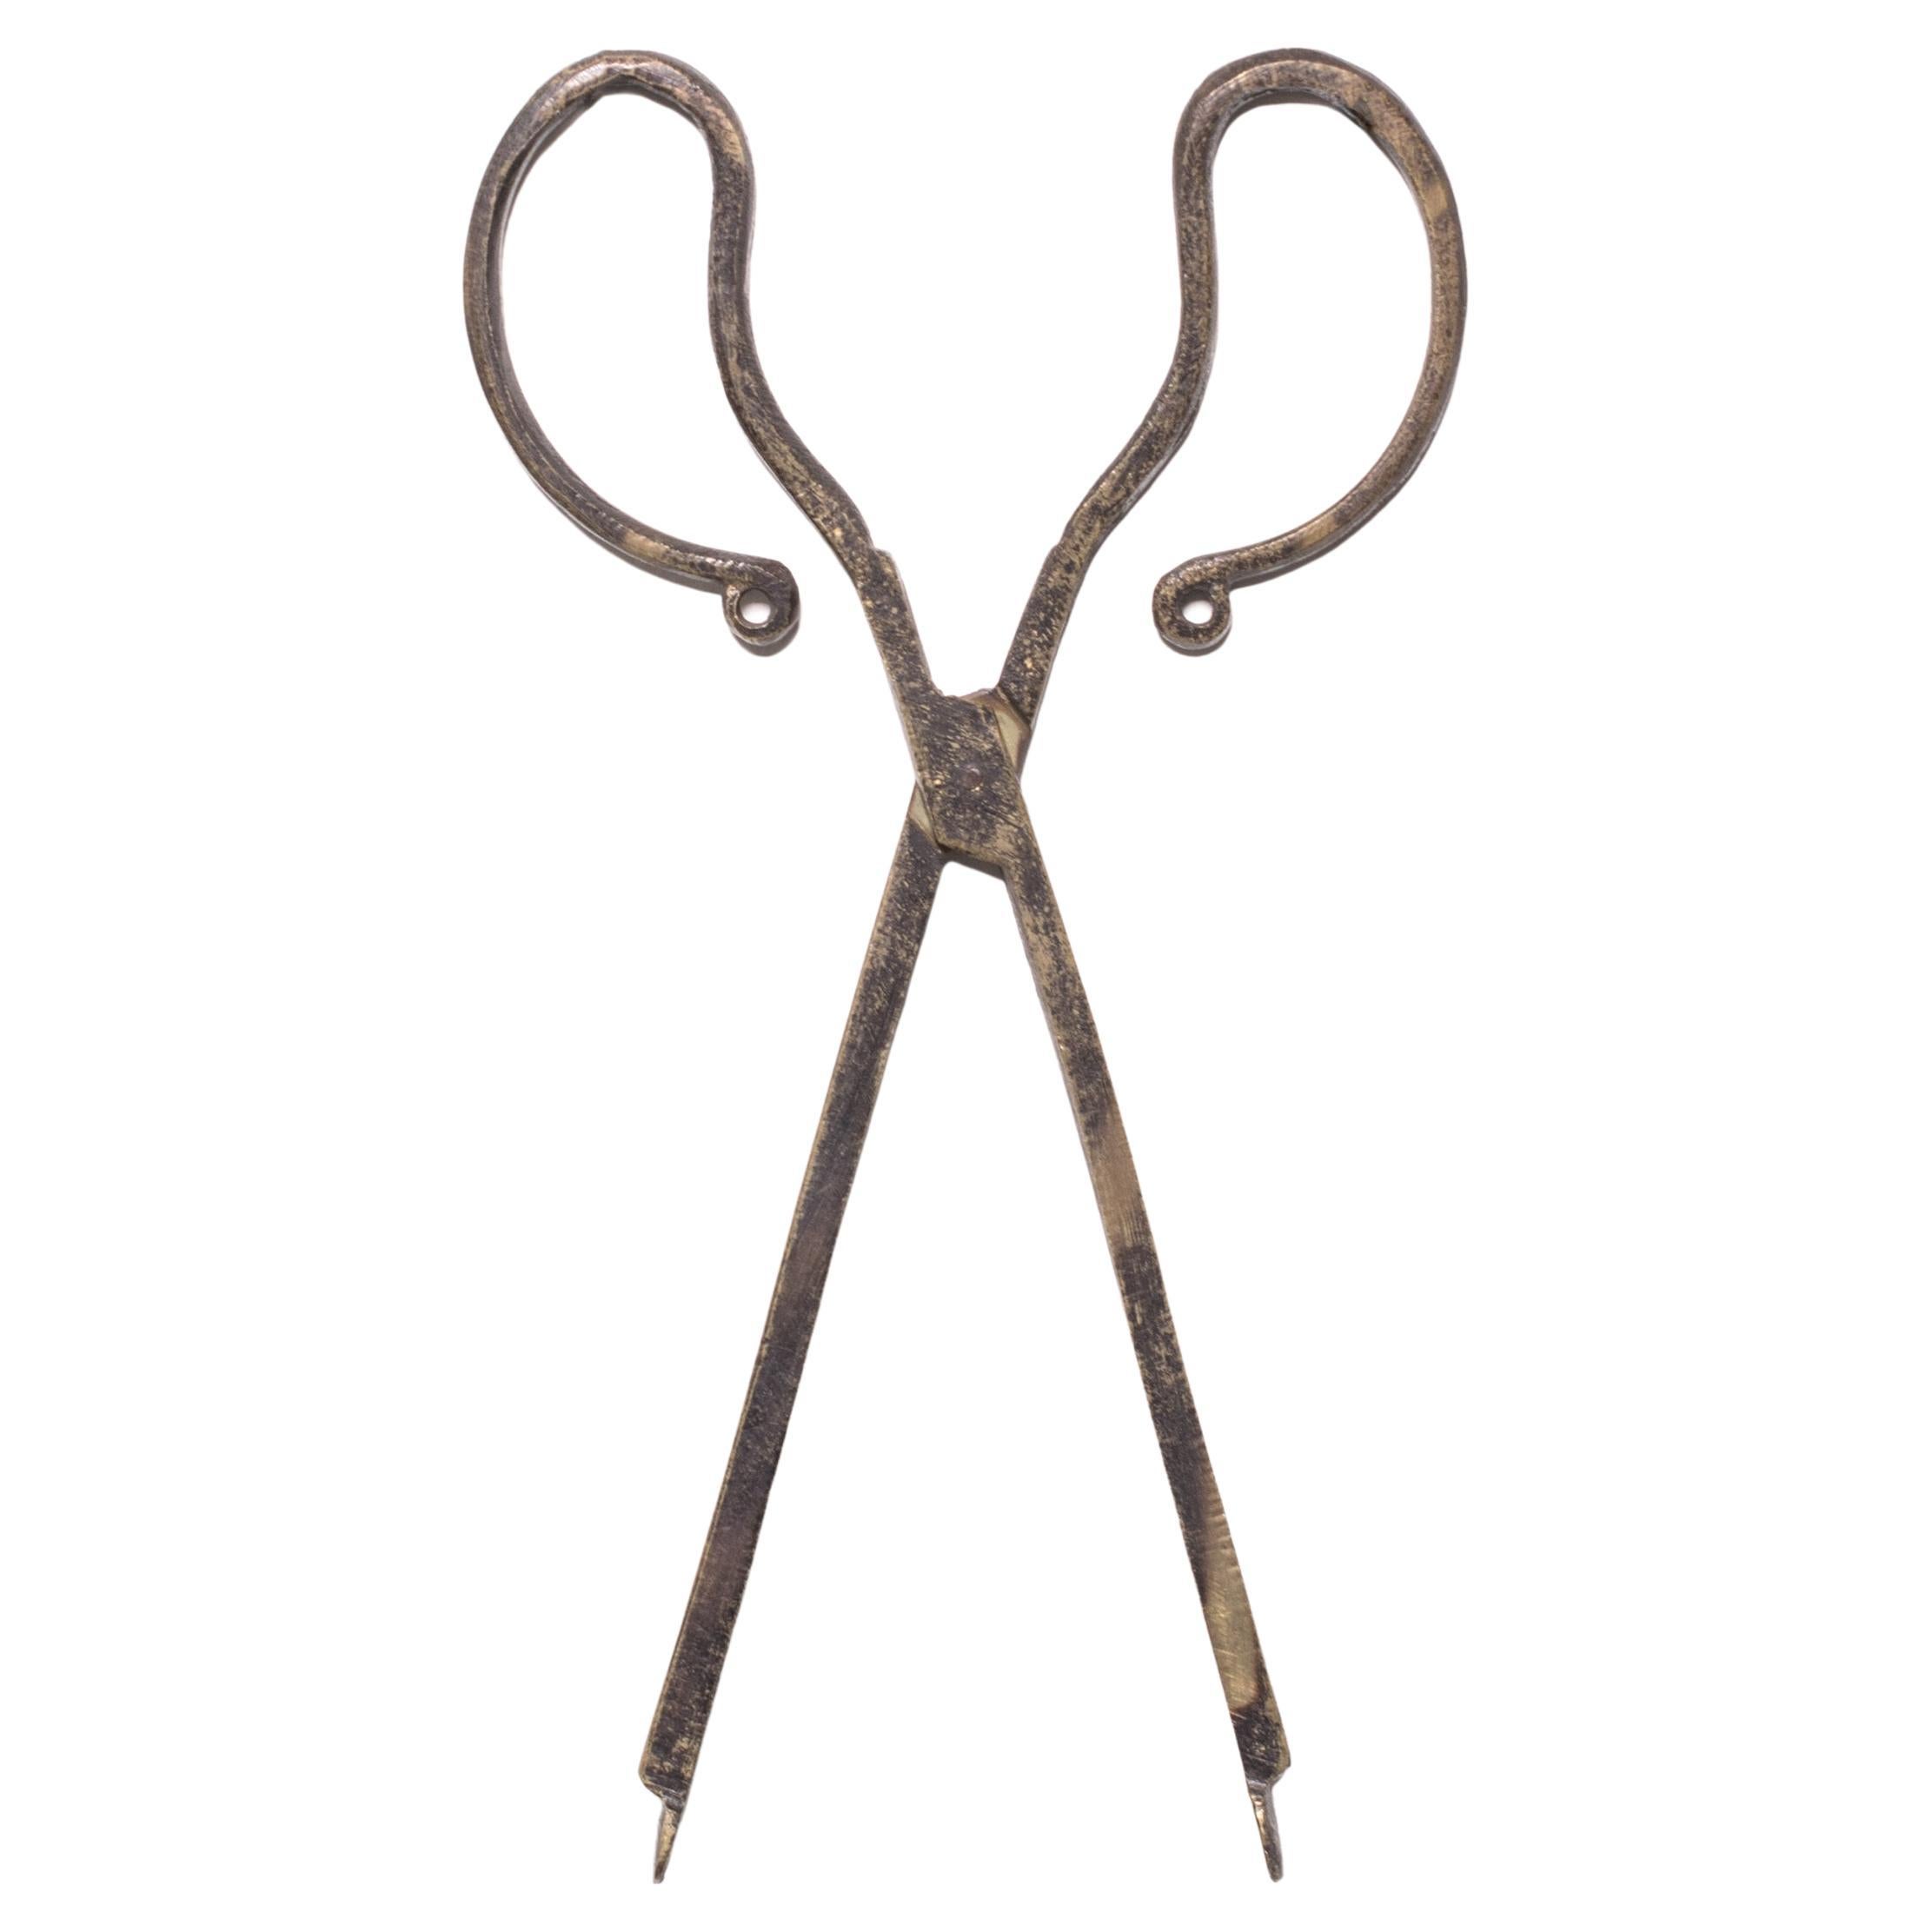 Pair of Chinese Brass Brazier Tongs, c. 1850 For Sale